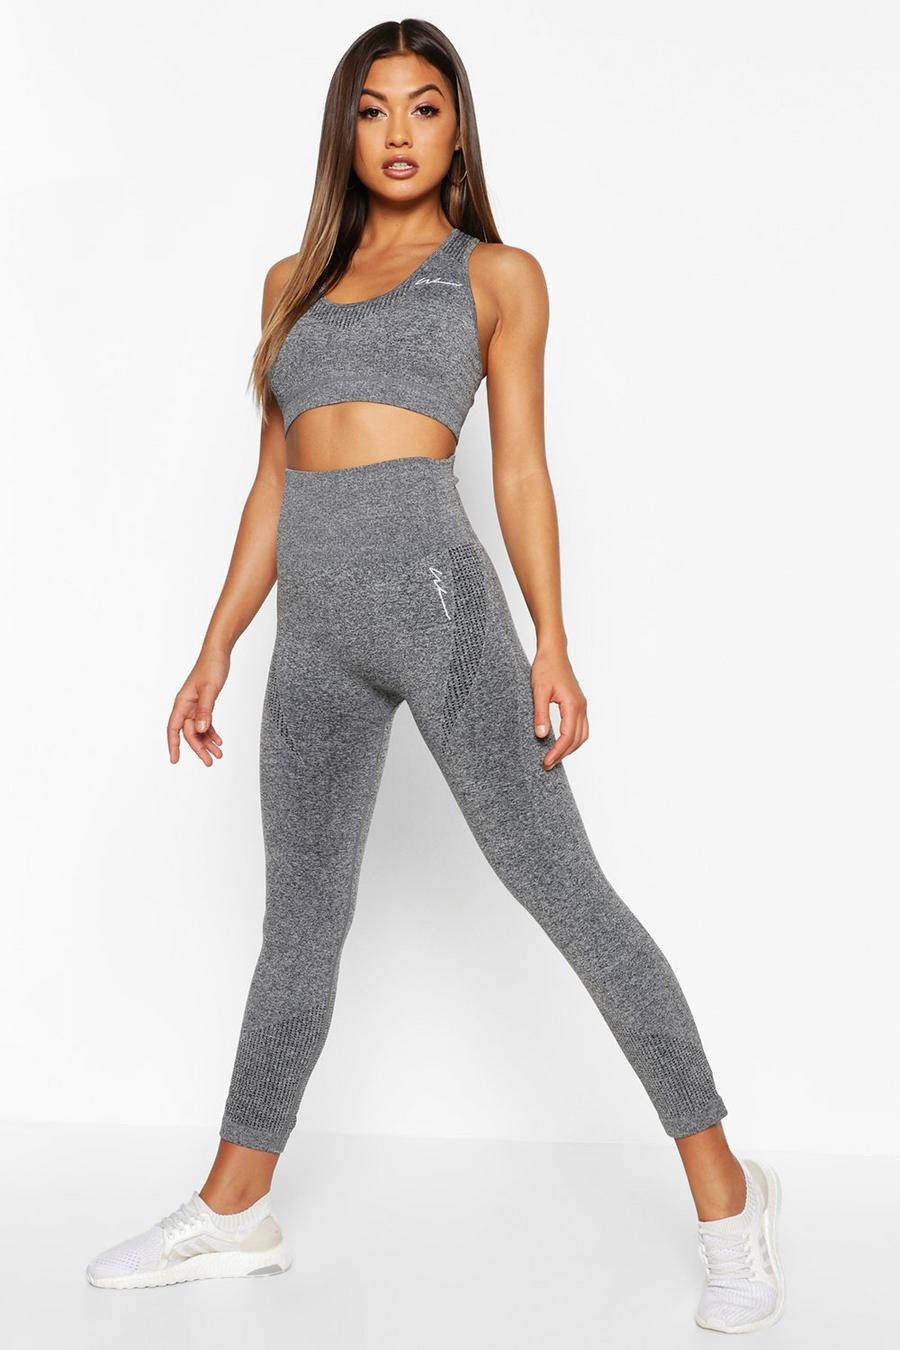 Urban Threads seamless squat proof gym leggings in charcoal gray heather